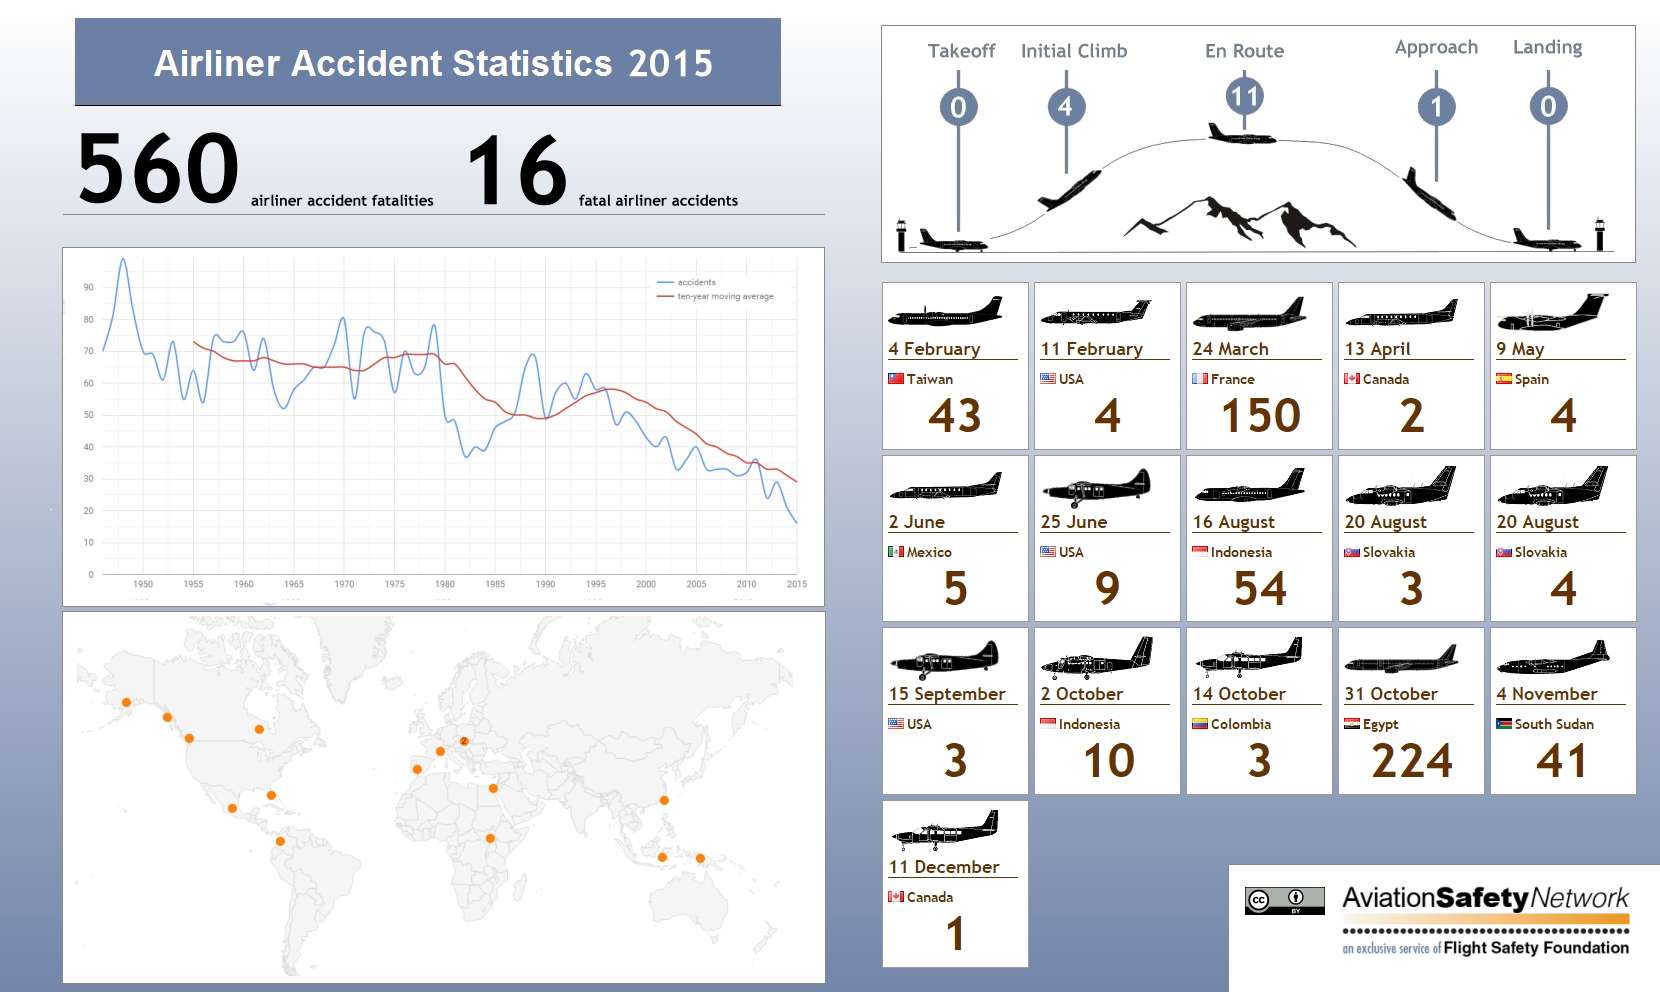 Despite several high profile accidents, the year 2015 turned out to be a very safe year for commercial aviation. Infographic courtesy Aviation Safety Network.